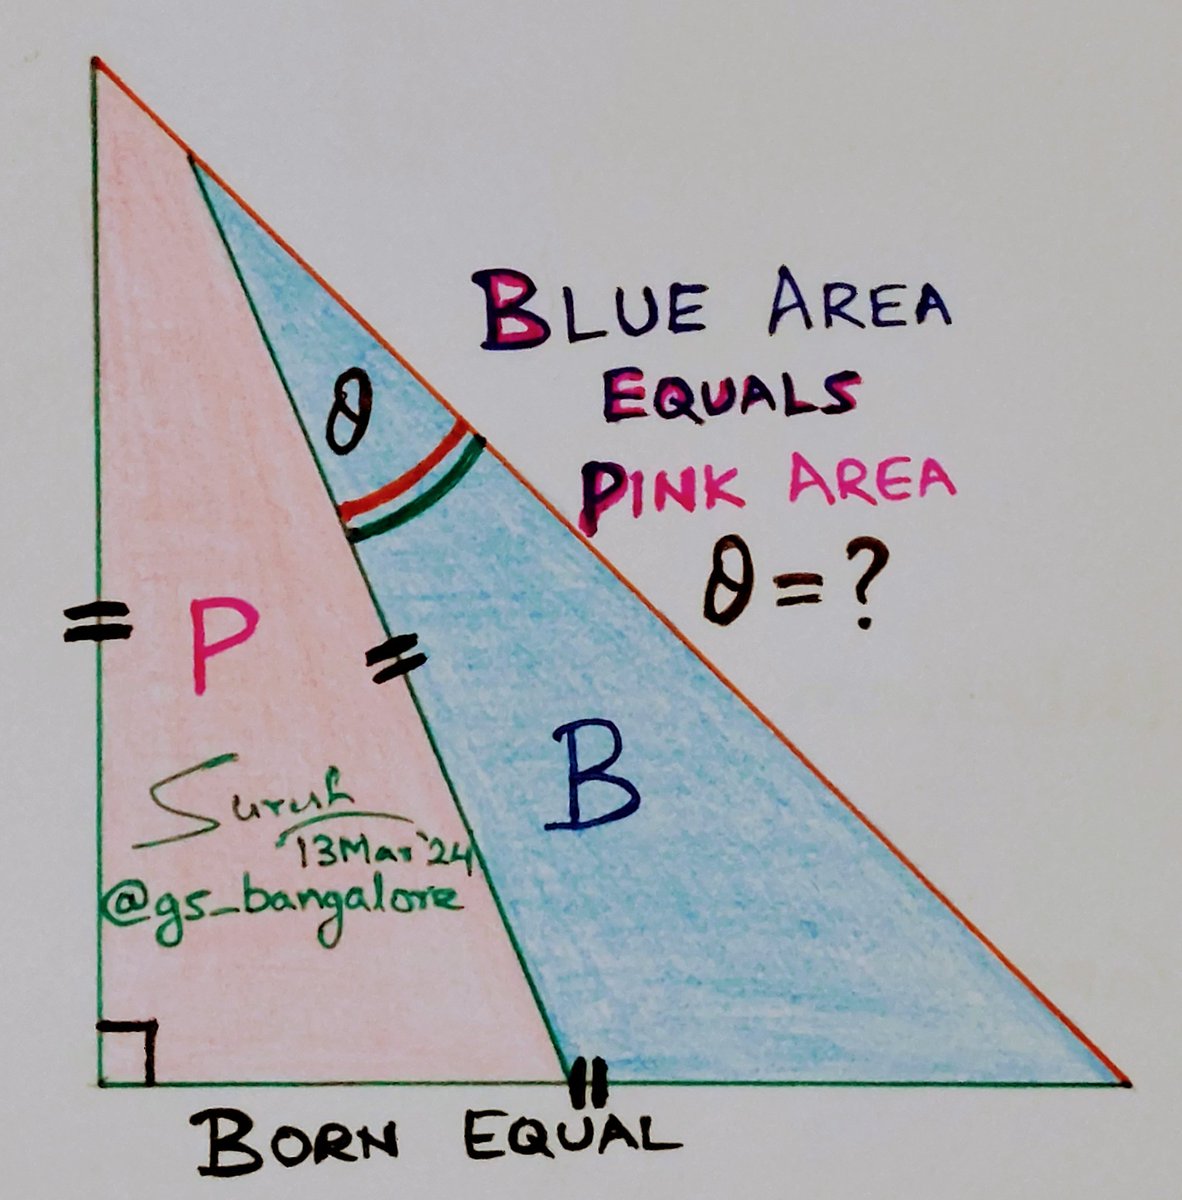 Born Equal

Right-angled isoceles and side-length bisecting the area. Angle theta = ?

#triangle #geometry #geometrique #angle #equal #area #trigonometry #puzzle #thinking #logic #reasoning #today #mathteachers #math #teacher #mathematics #Algebra #highschool #students #learning